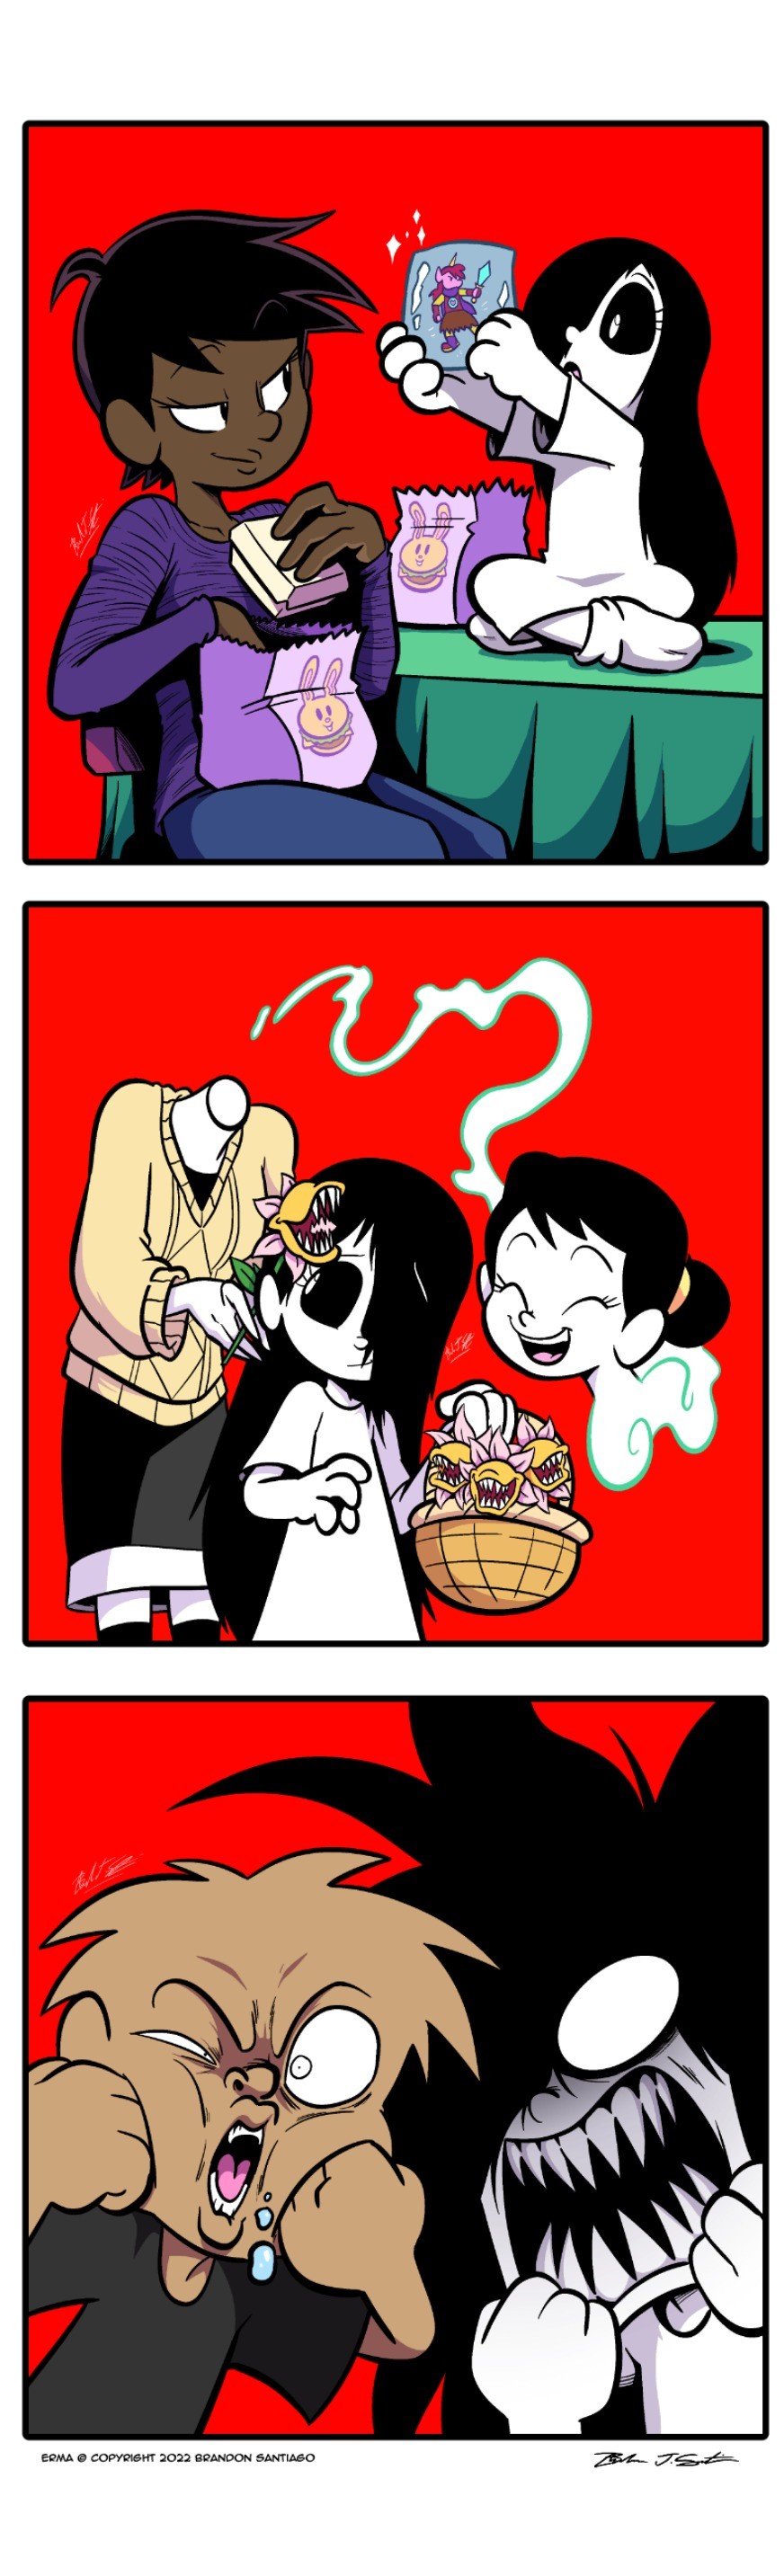 Erma Moments #4. .. I wish people posted these more